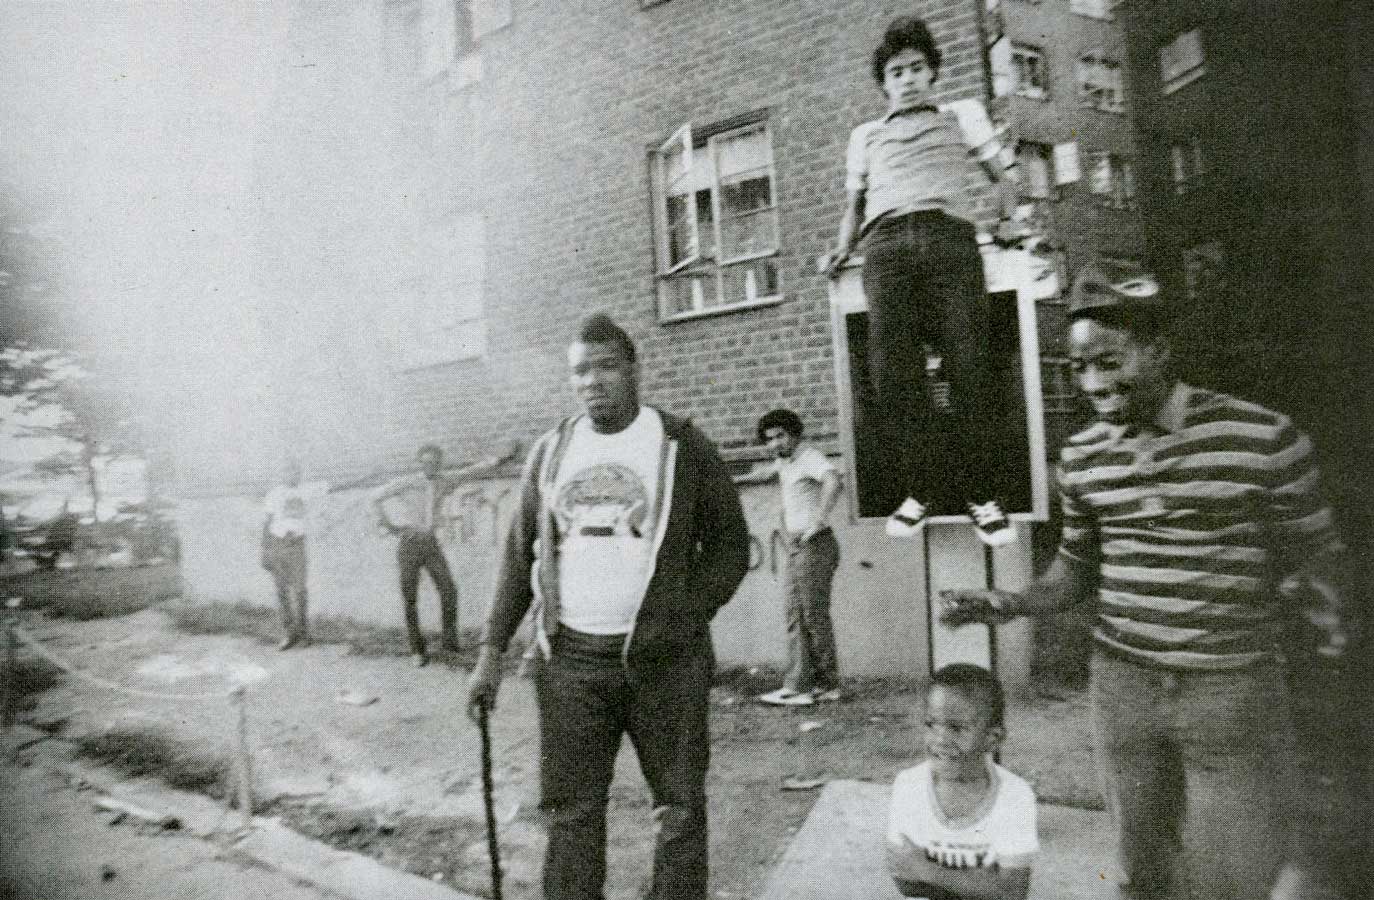 Afrika Bambaataa at Bronx River Project (1982) from Steven Hager, Hip Hop: the Illustrated History of Break Dancing, Rap Music, and Graffiti